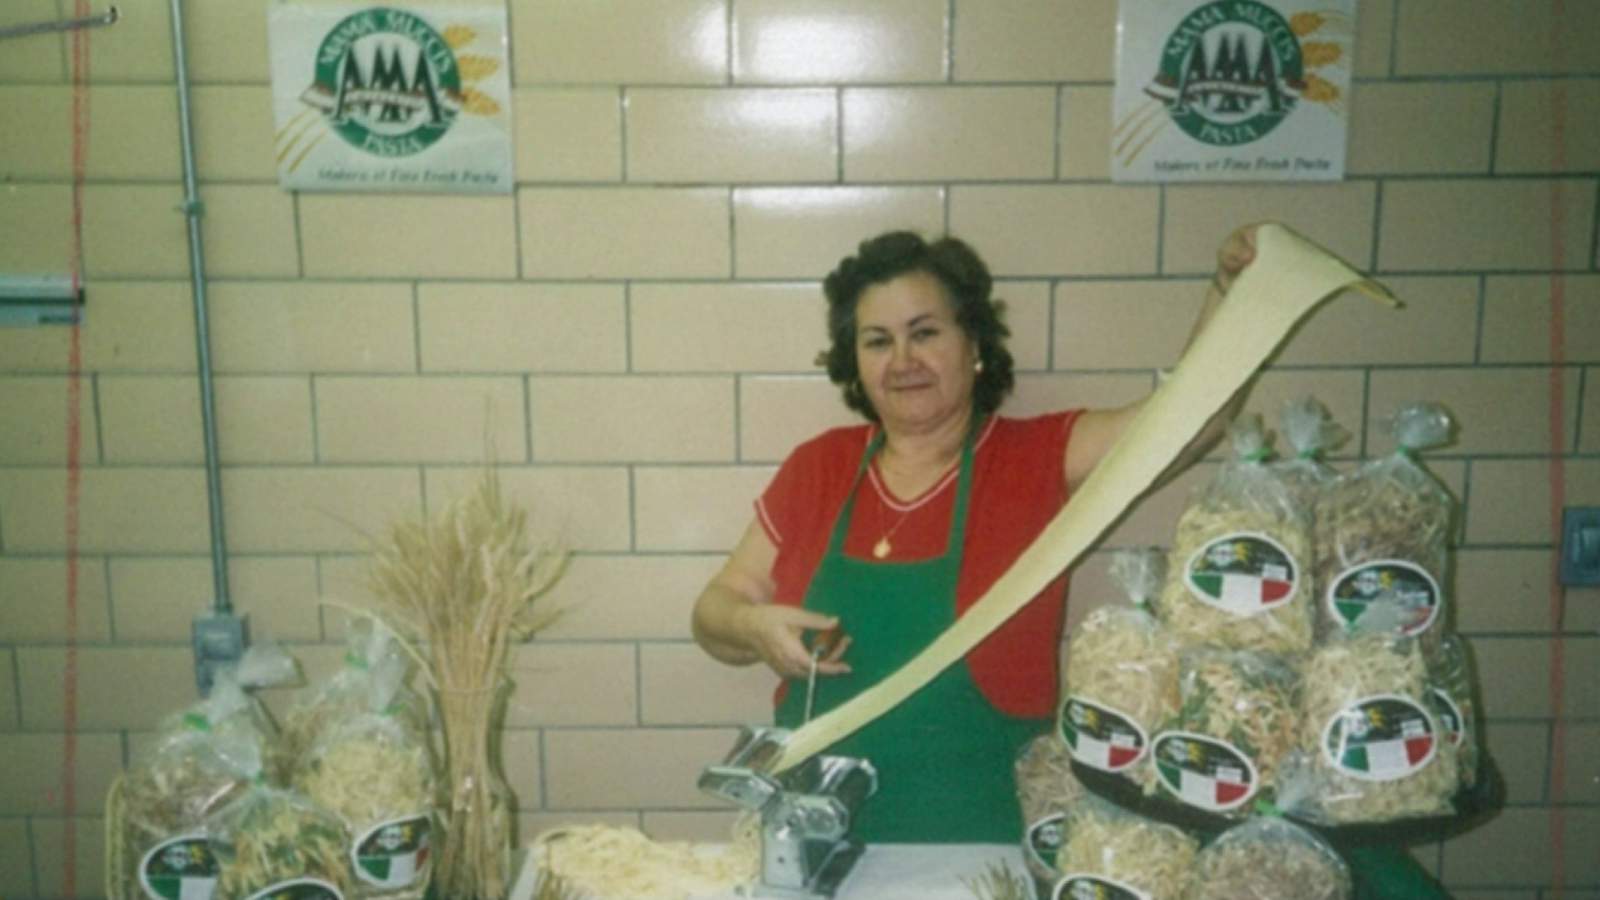 See how this noodle business grew out of one family’s basement